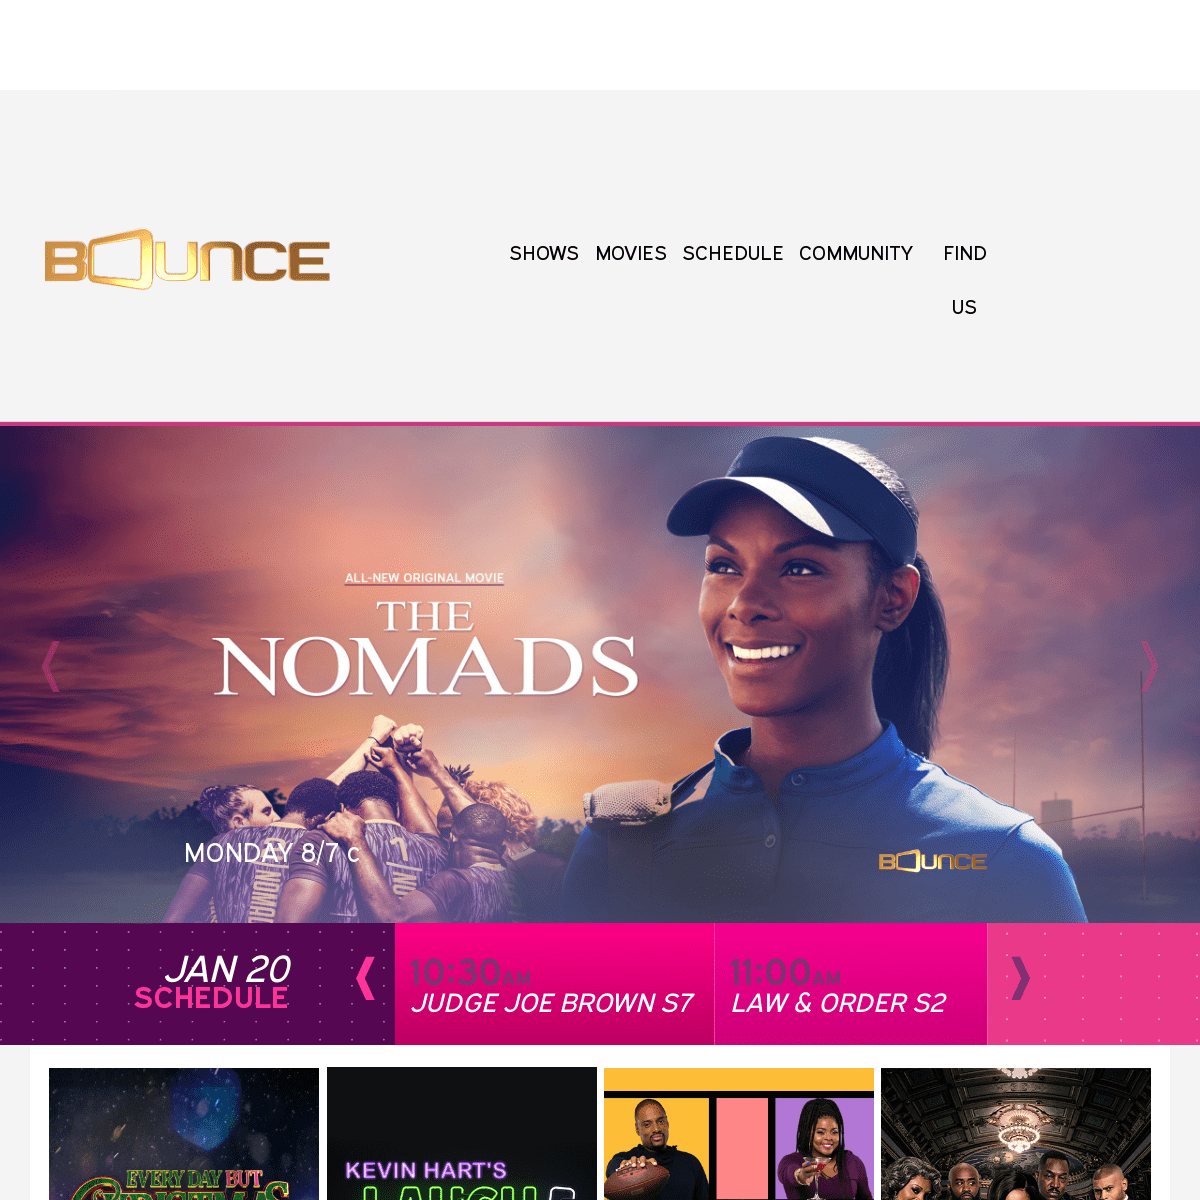 A complete backup of bouncetv.com